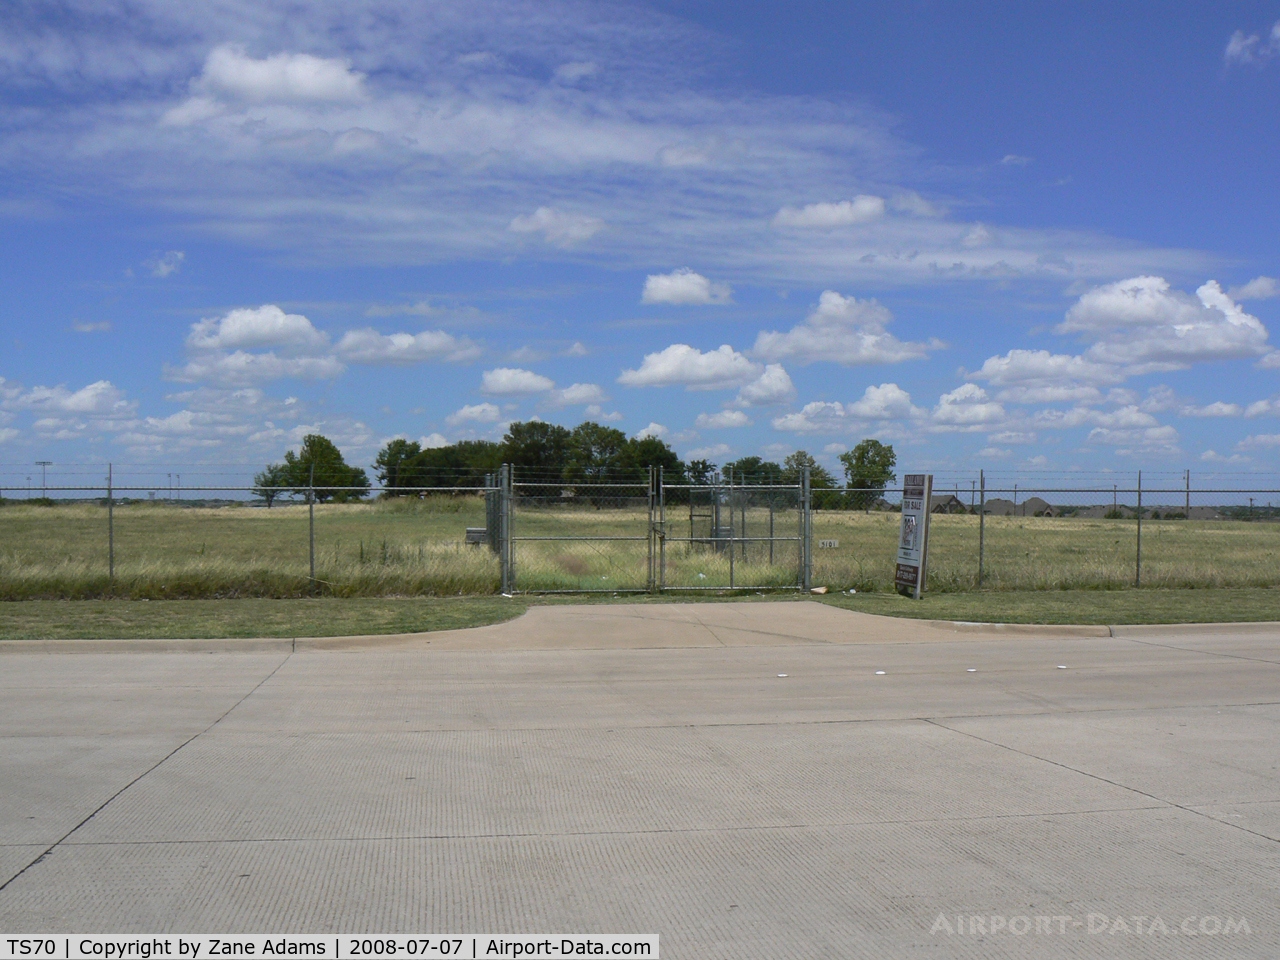 Jack Miller Airport (TS70) - Jack Miller Stolport - Now closed by encroachment and development land fenced and recently sold hanger removed. The only clue as to its former use is a windsock pole. 